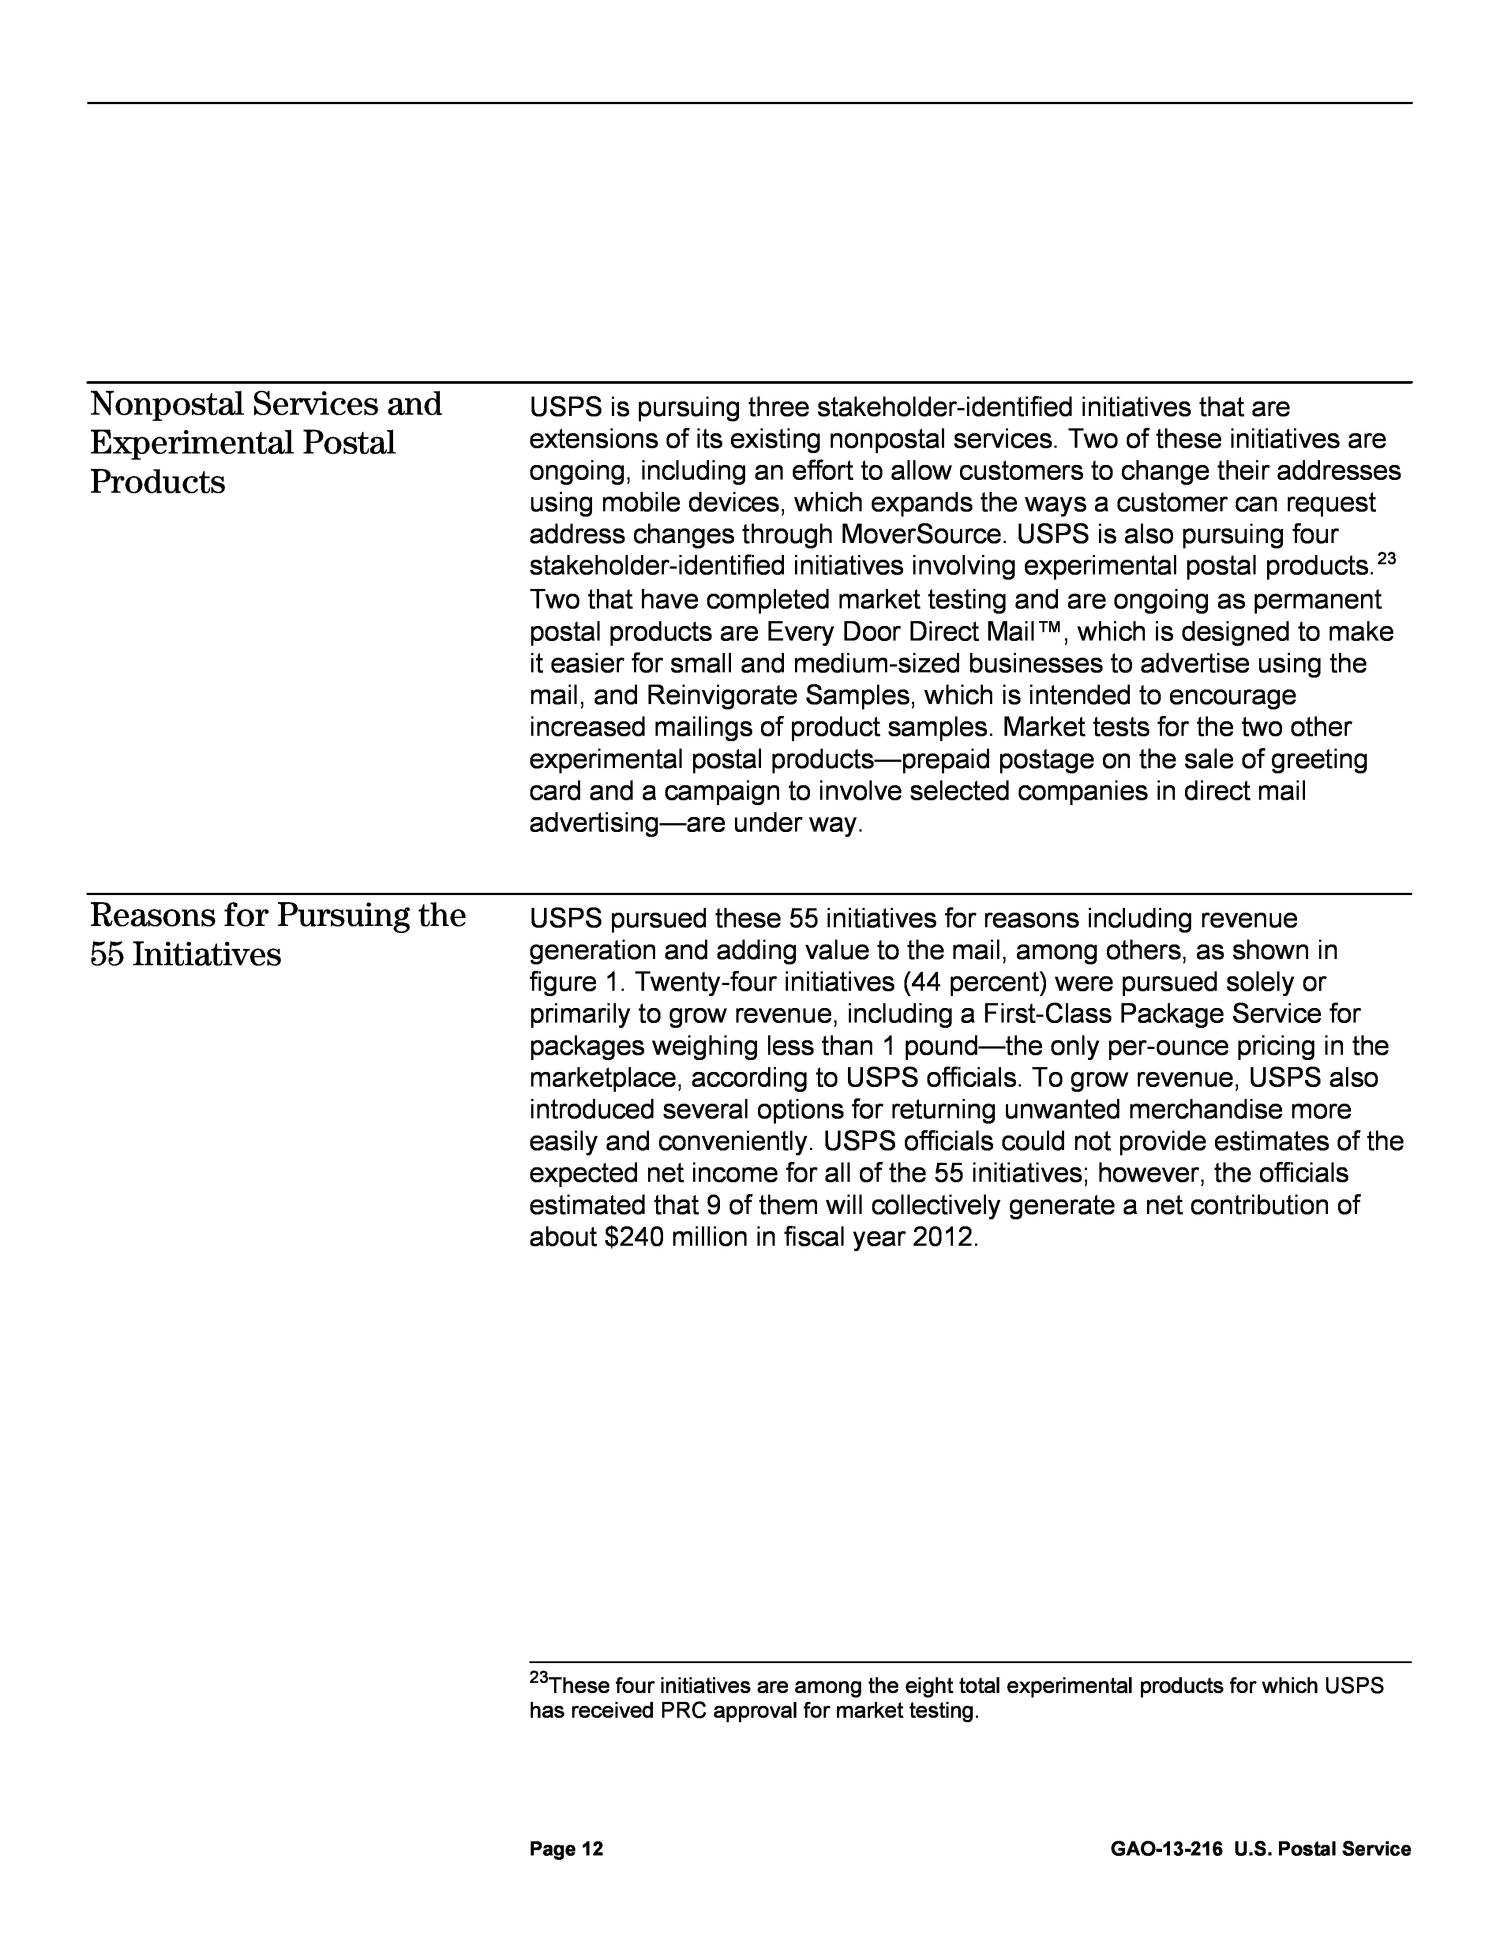 U.S. Postal Service: Overview of Initiatives to Increase Revenue and Introduce Nonpostal Services and Experimental Postal Products
                                                
                                                    [Sequence #]: 16 of 37
                                                